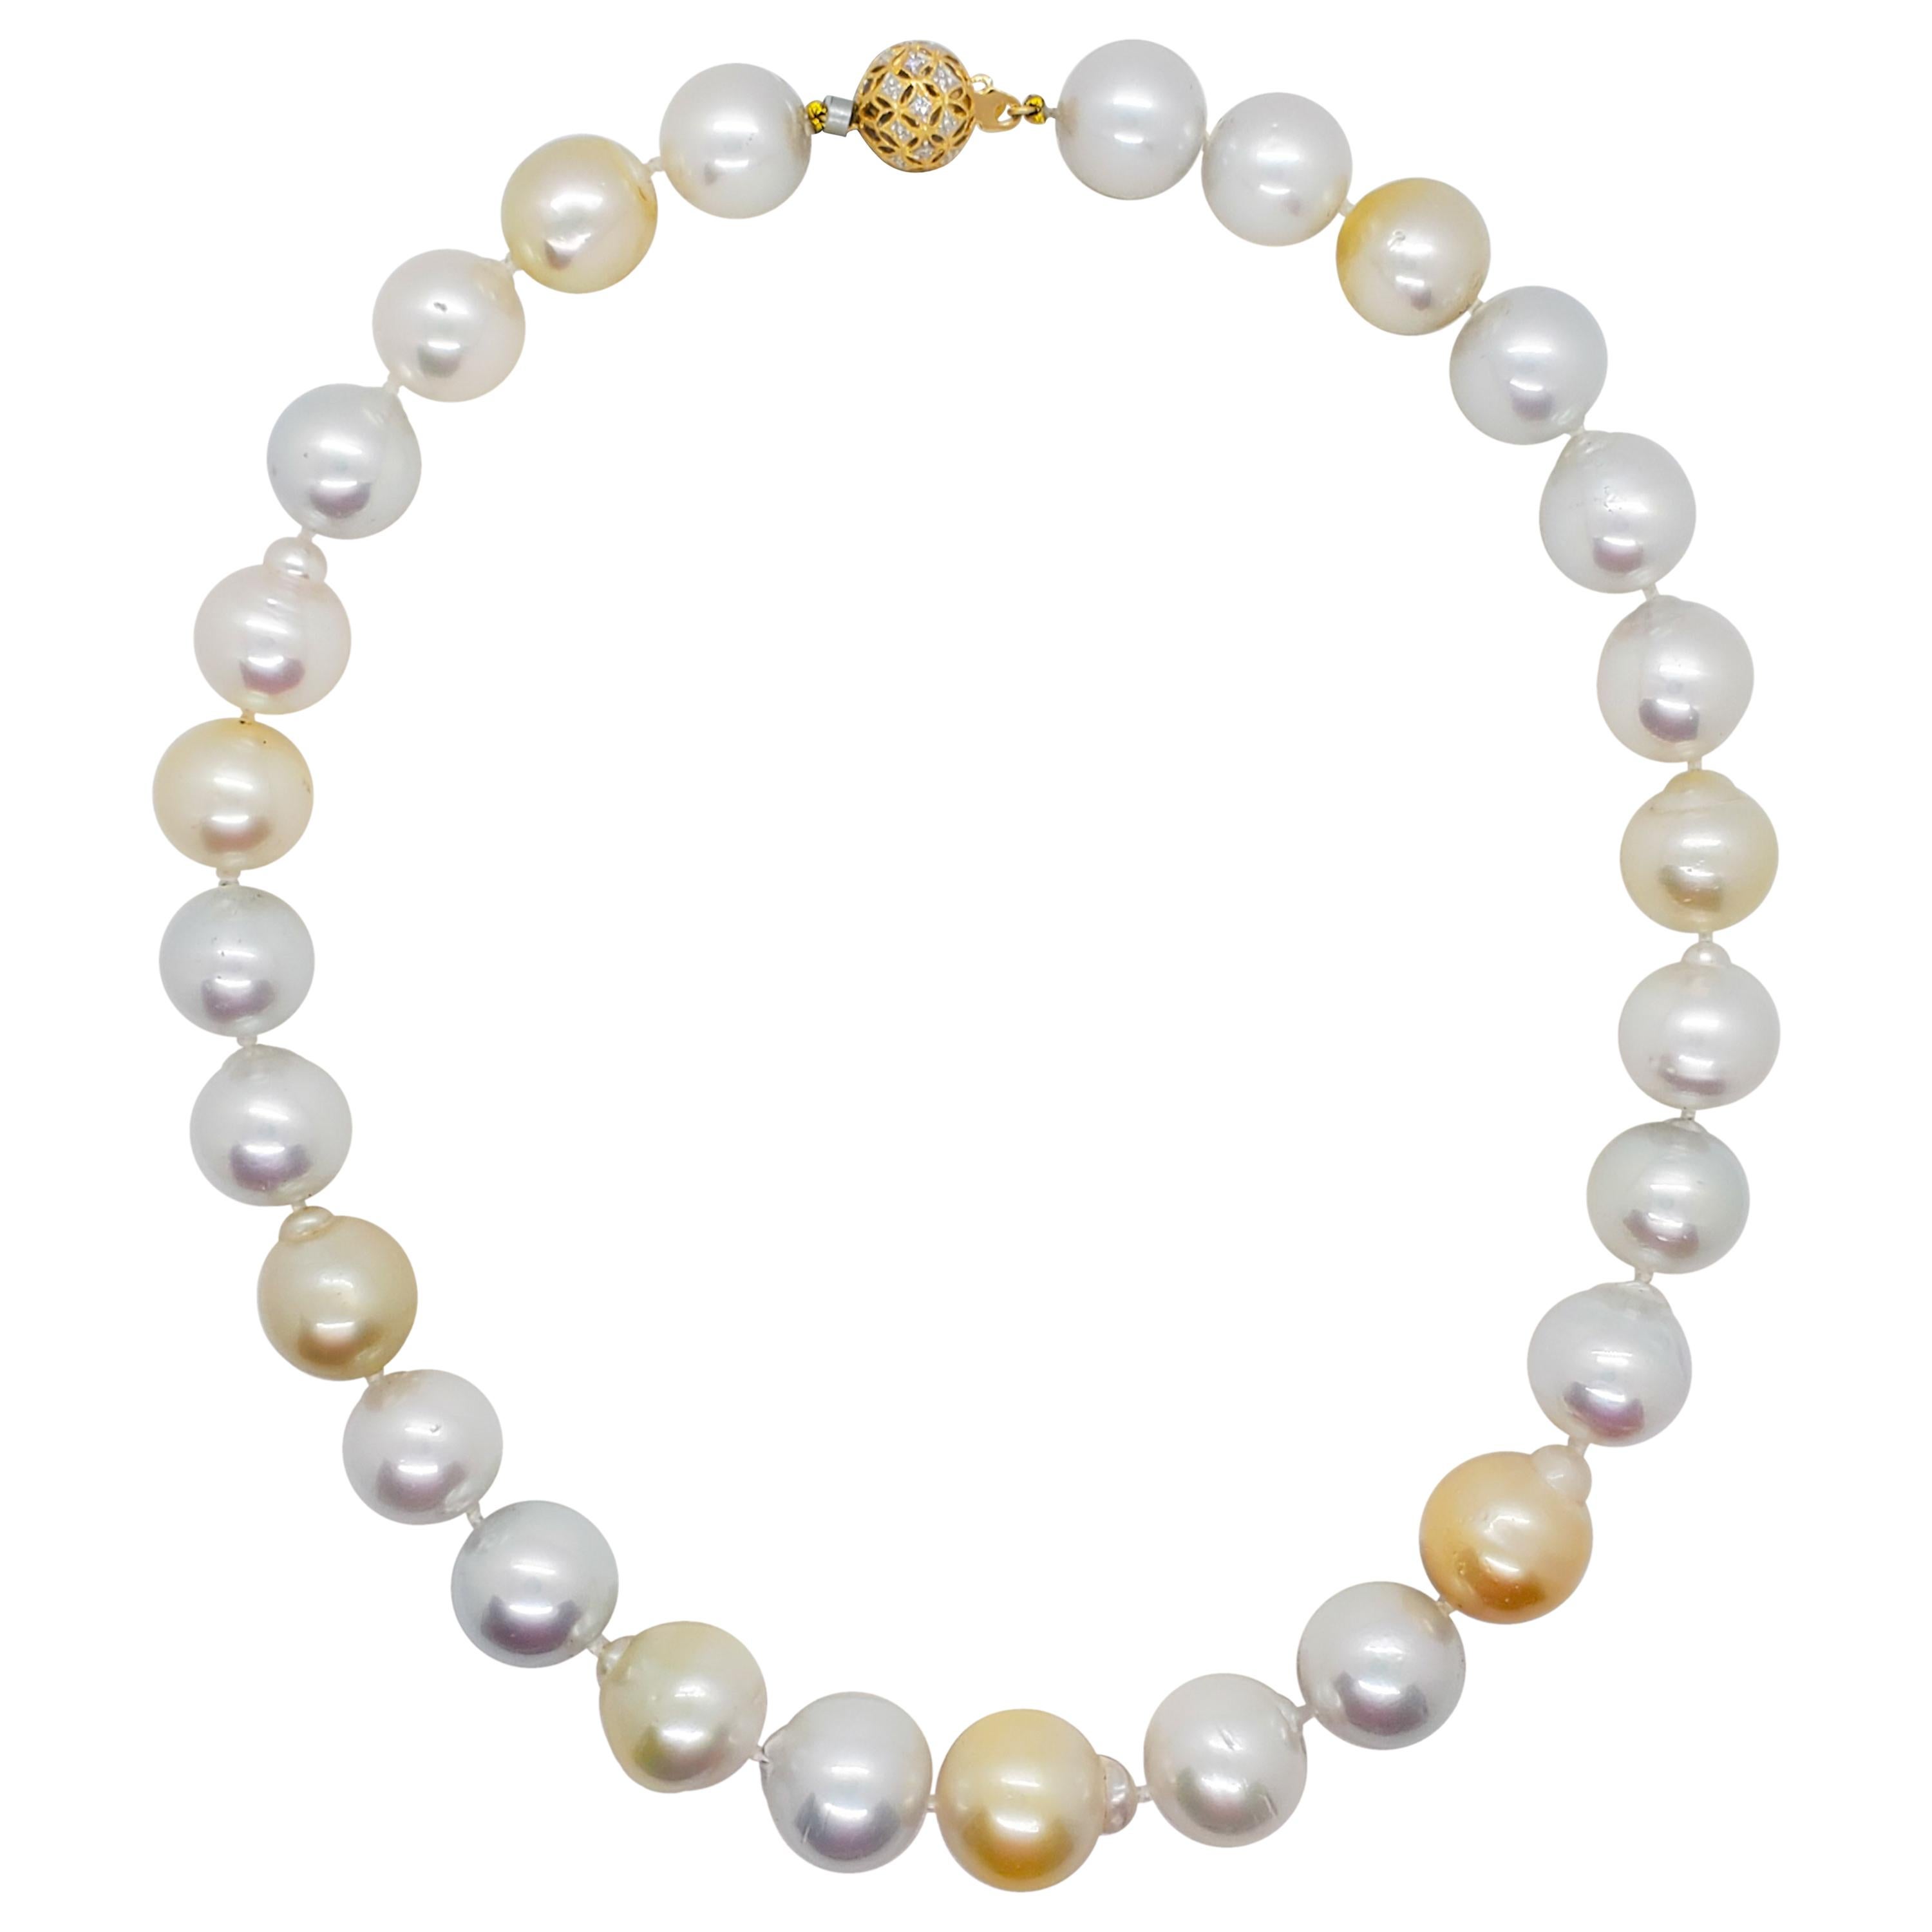  White and Yellow South Sea Pearl Necklace with Diamond Clasp